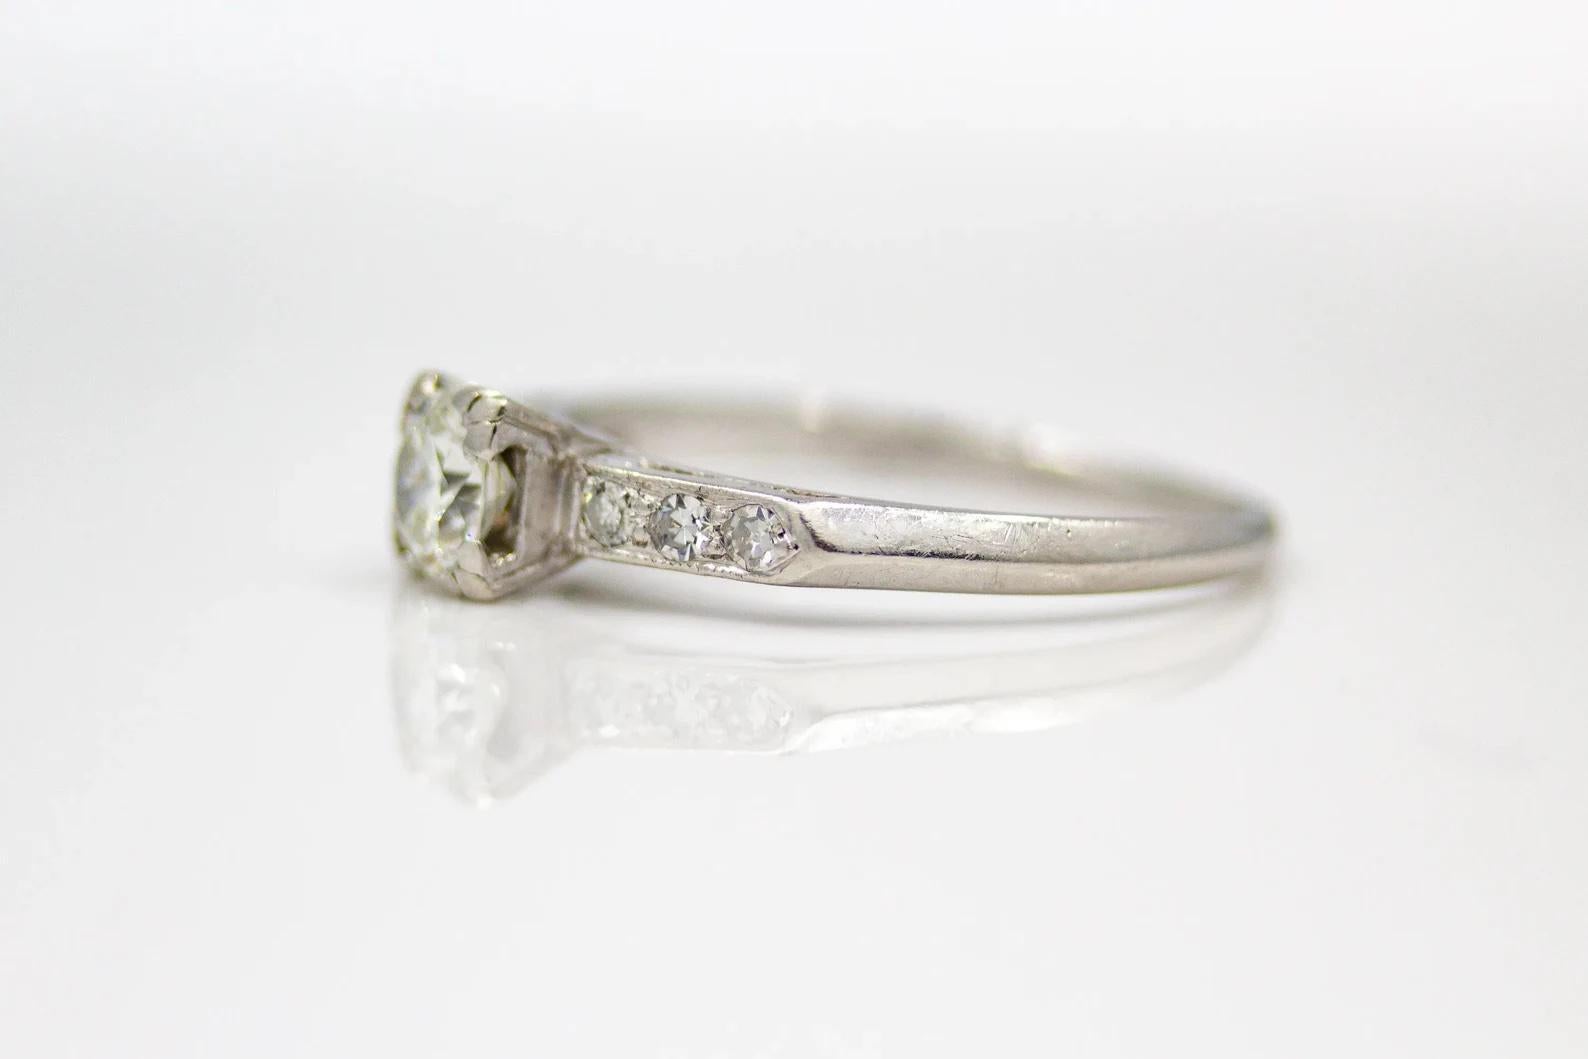 A classic late Art Deco period diamond engagement ring in platinum. Centered by a 0.53 carat Old European Cut diamond grading as H color and VS2 clarity. Framing the center diamond are six accenting diamonds weighing 0.09ctw.

In excellent condition